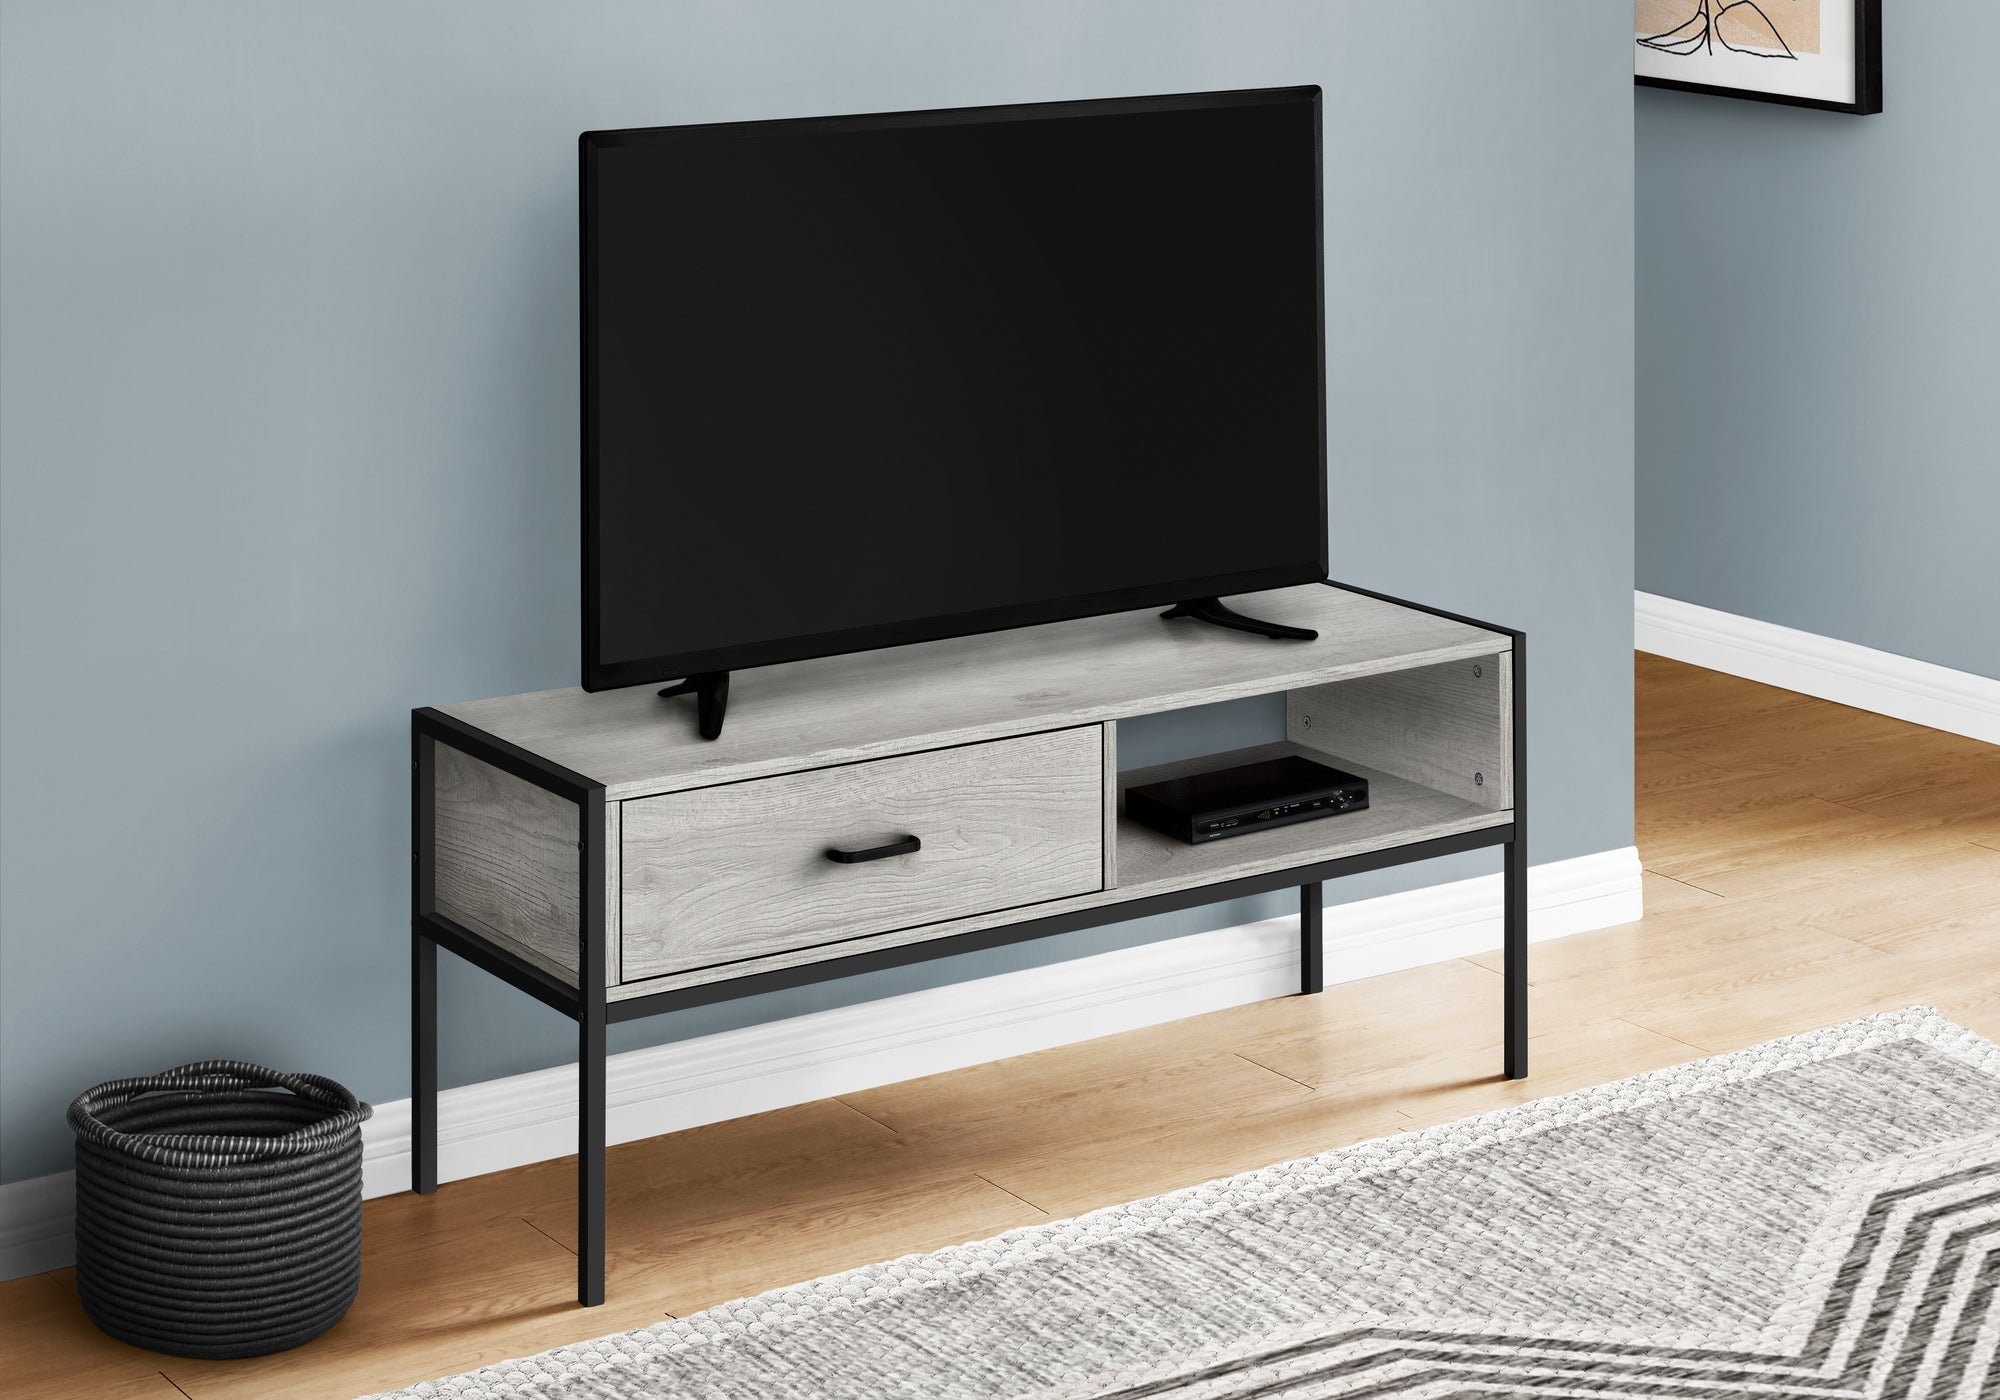 I 2875 - TV STAND - 48"L / GREY / BLACK METAL BY MONARCH SPECIALTIES INC